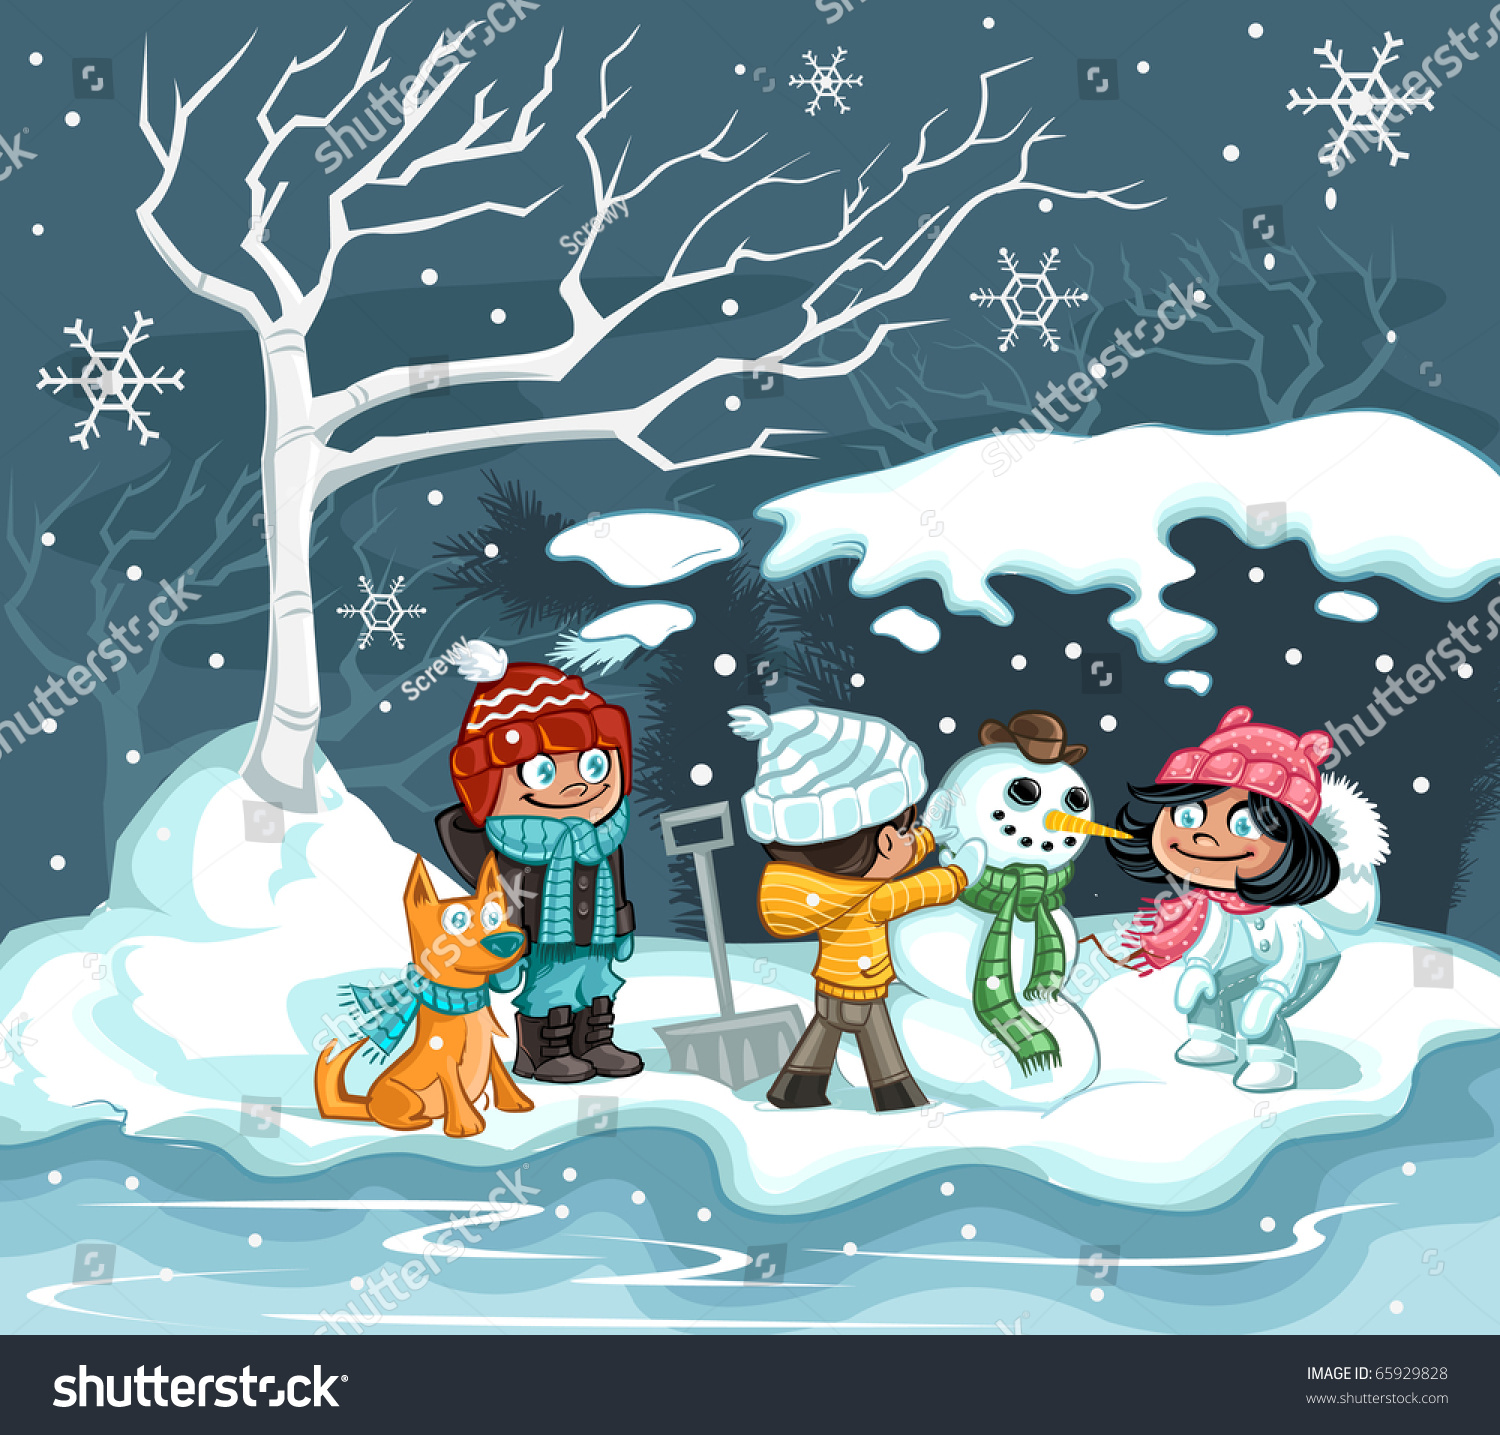 snowy day clipart - photo #29